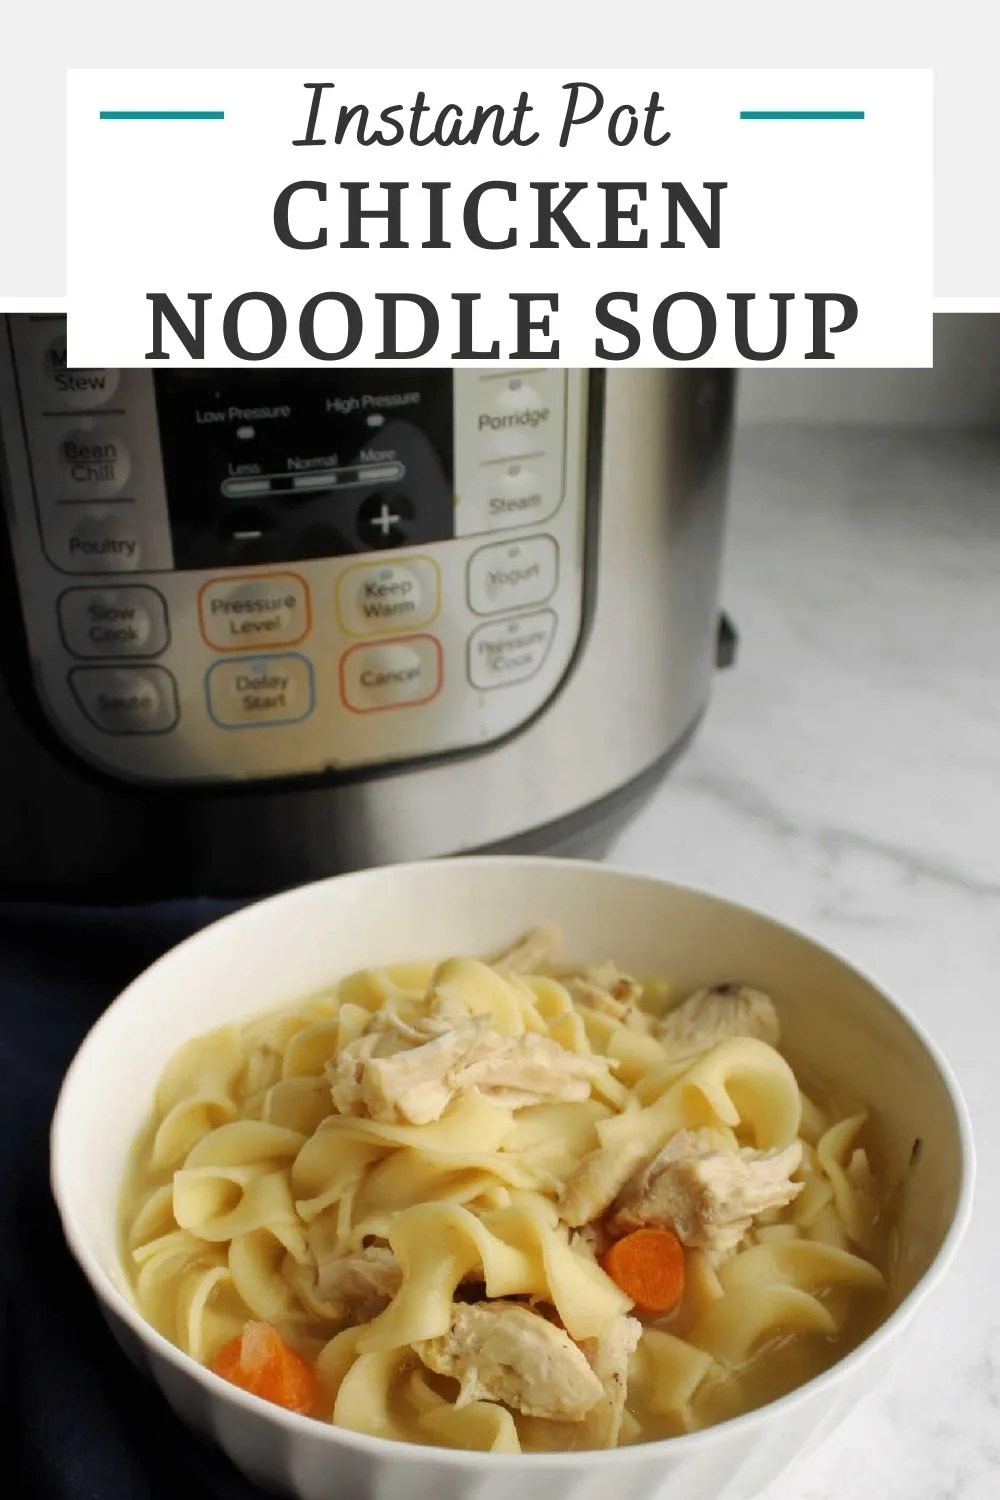 Make classic chicken noodle soup with the help of an instant pot or slow cooker. This recipe gives you all of the flavor you want in a really easy recipe.